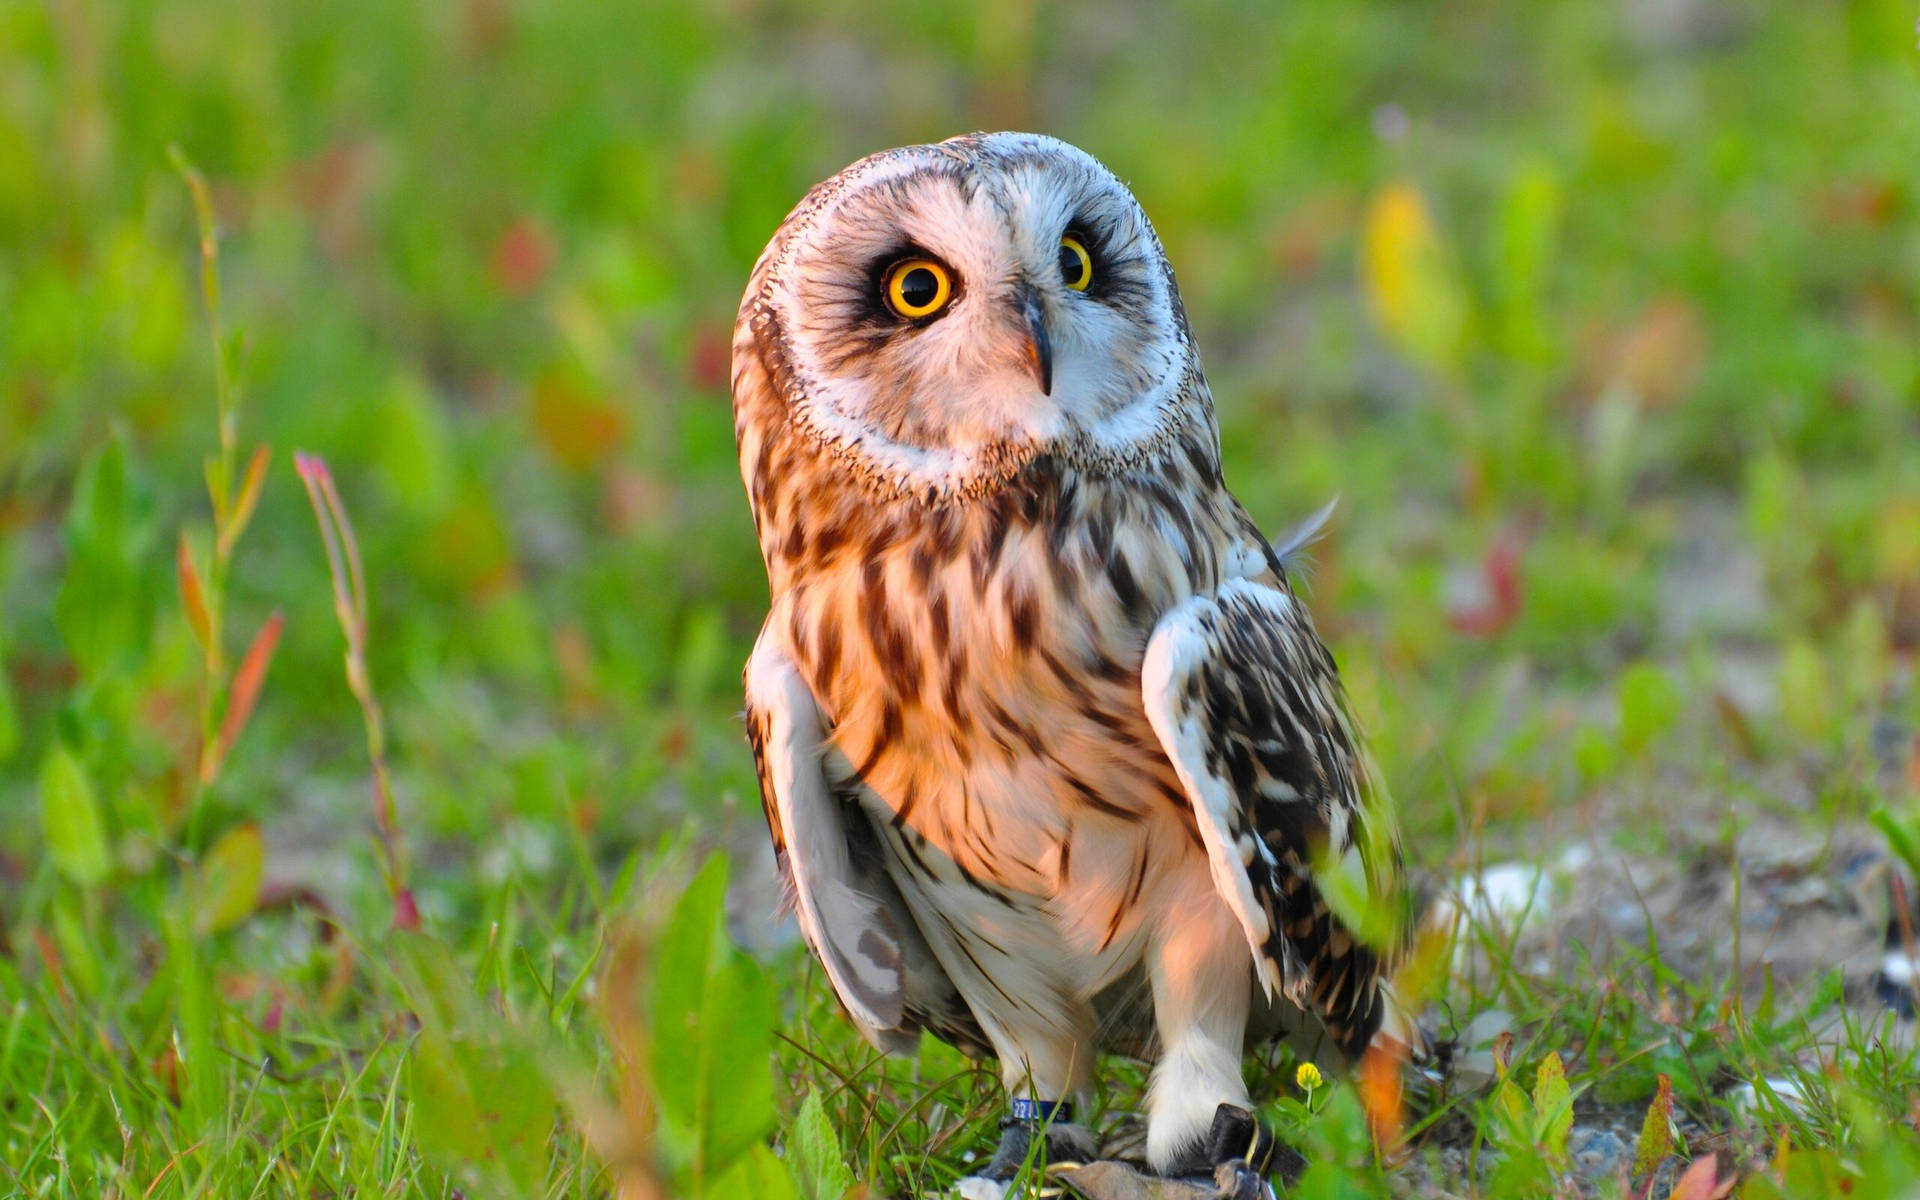 A small and adorable baby owl sits in its natural habitat. Wallpaper